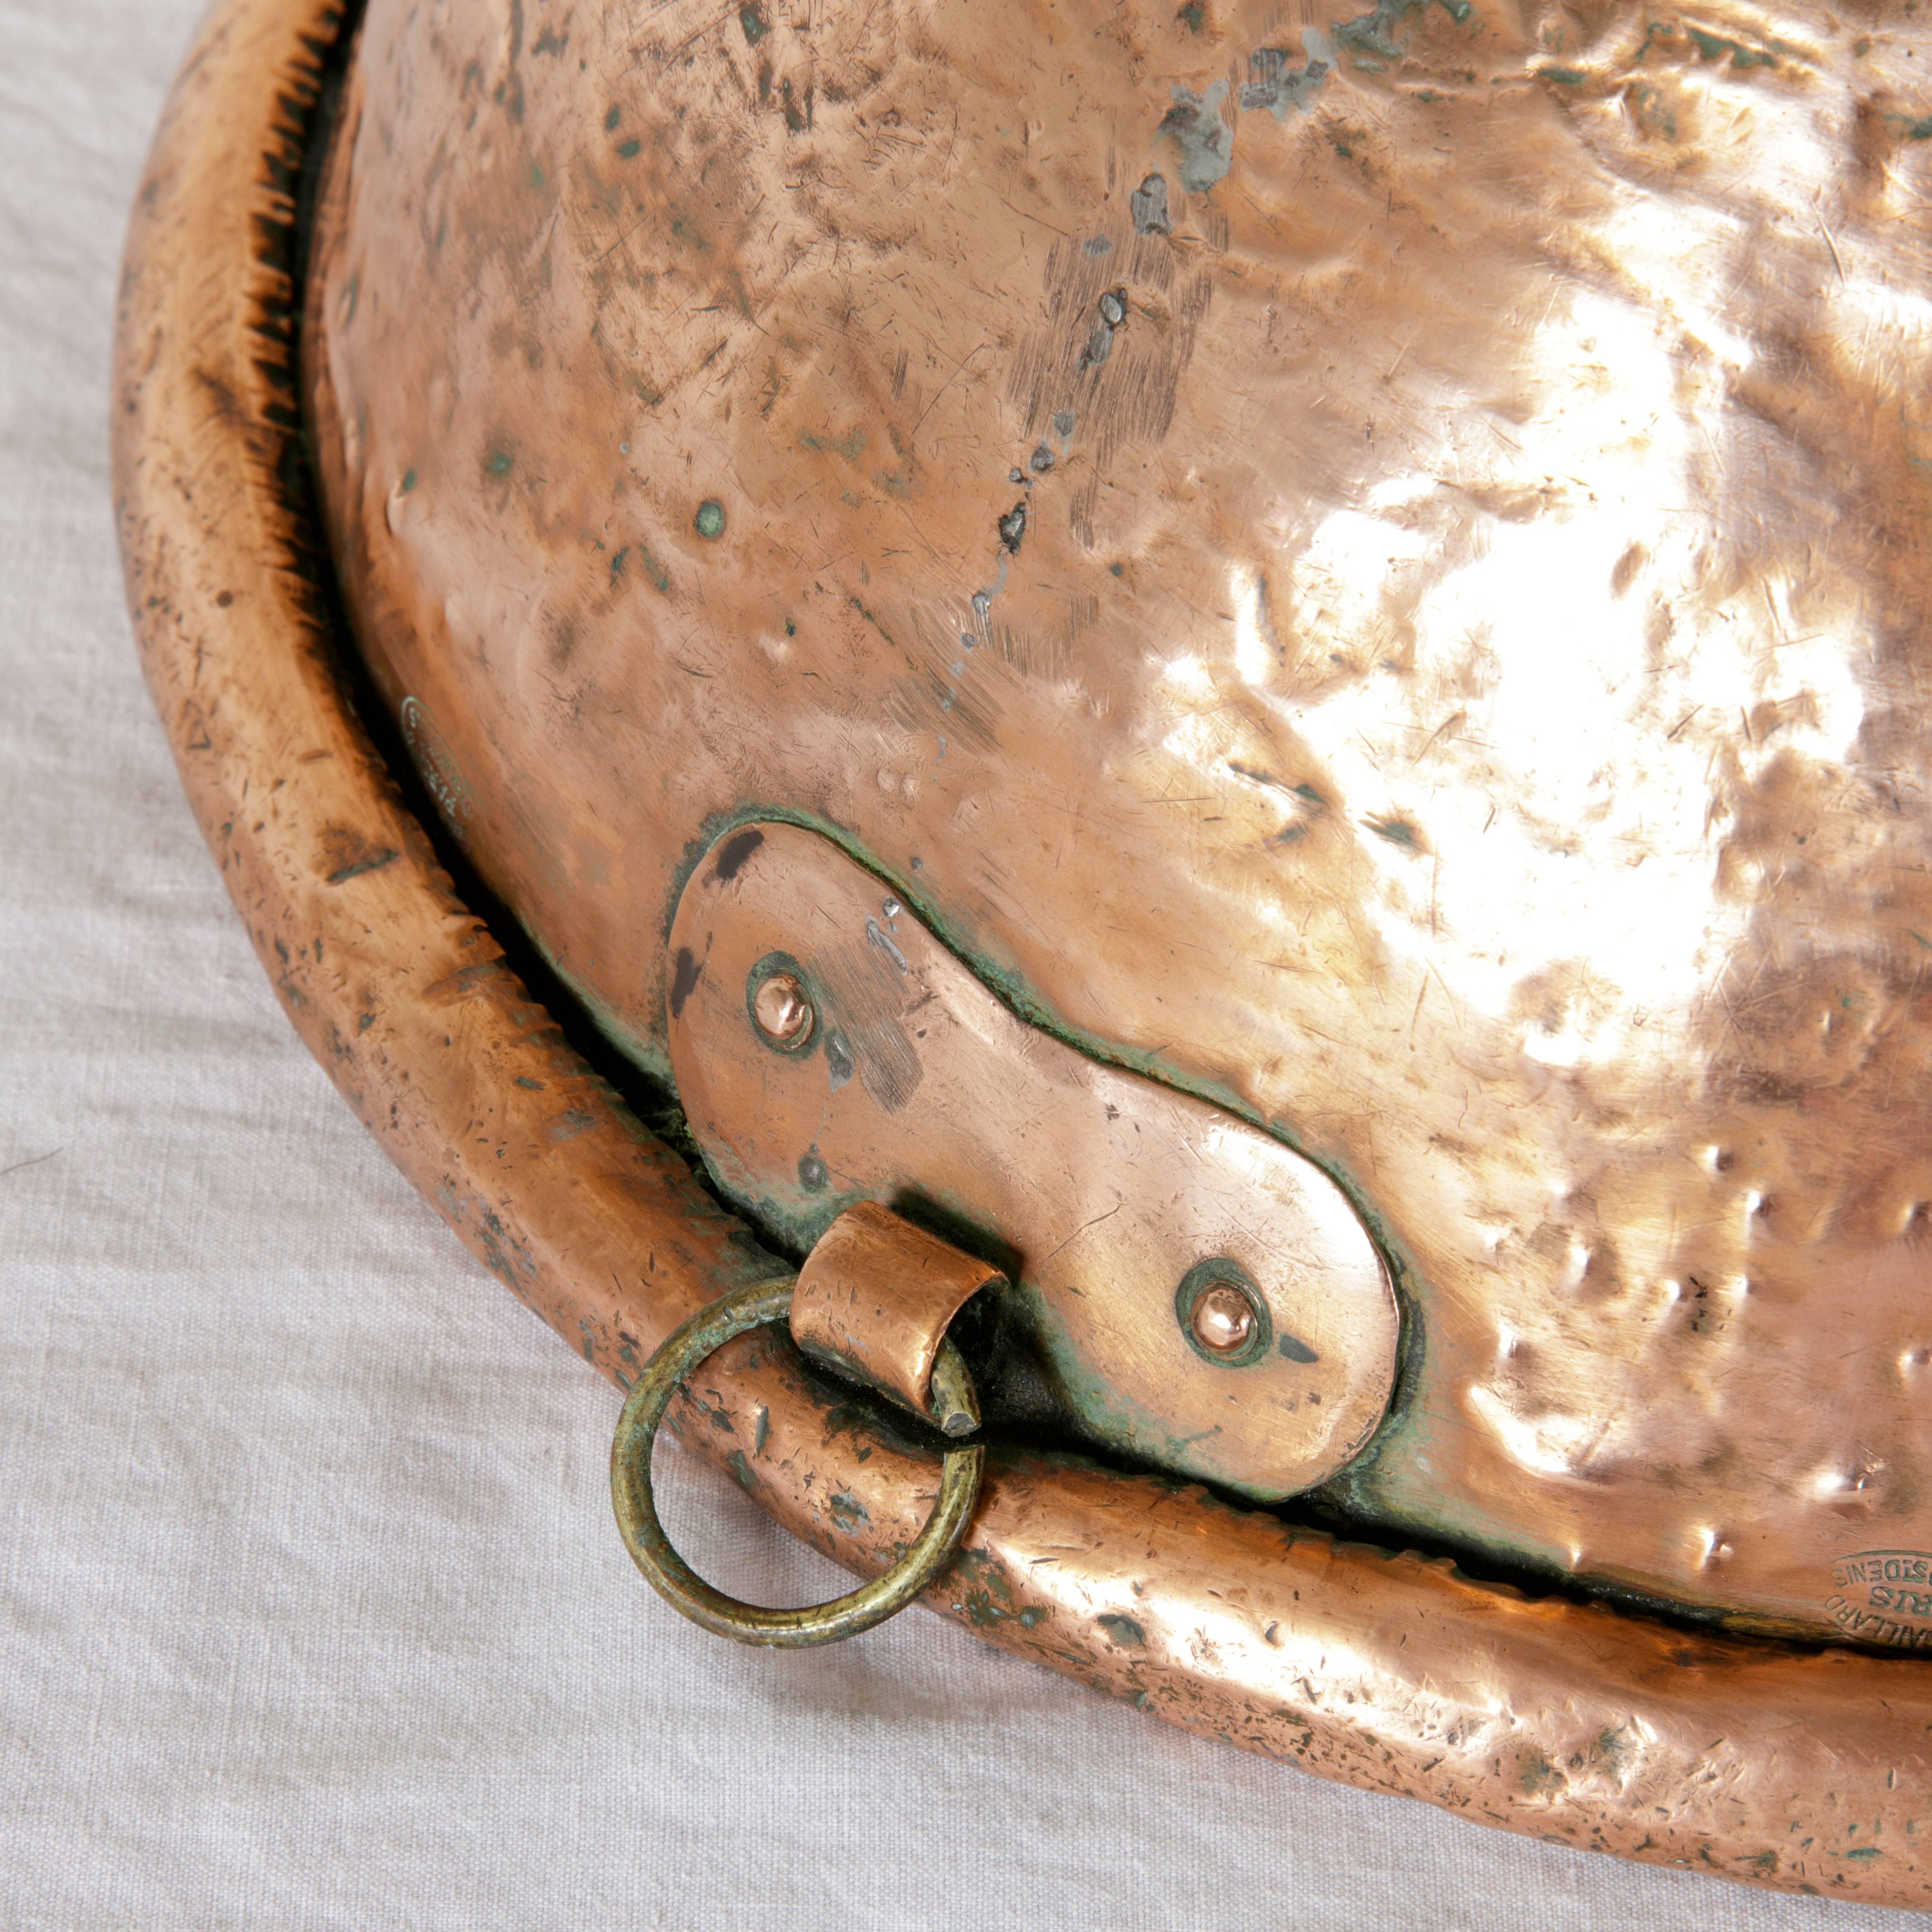 18th Century French Hand-Hammered Copper Mixing Bowl with Iron Ring for Hanging 4